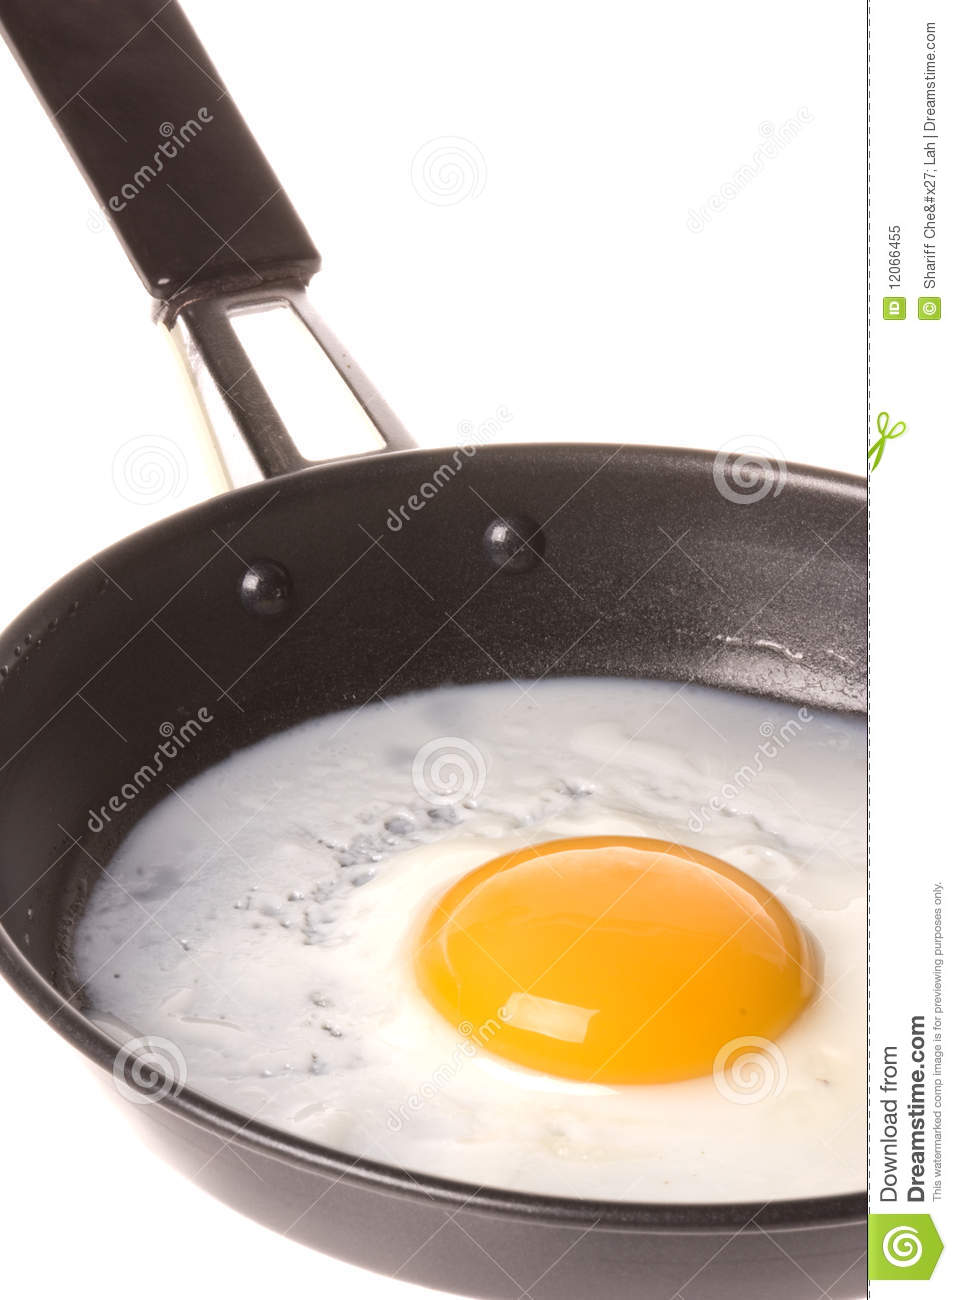 Frying Pan With Egg Isolated Royalty Free Stock Photo   Image